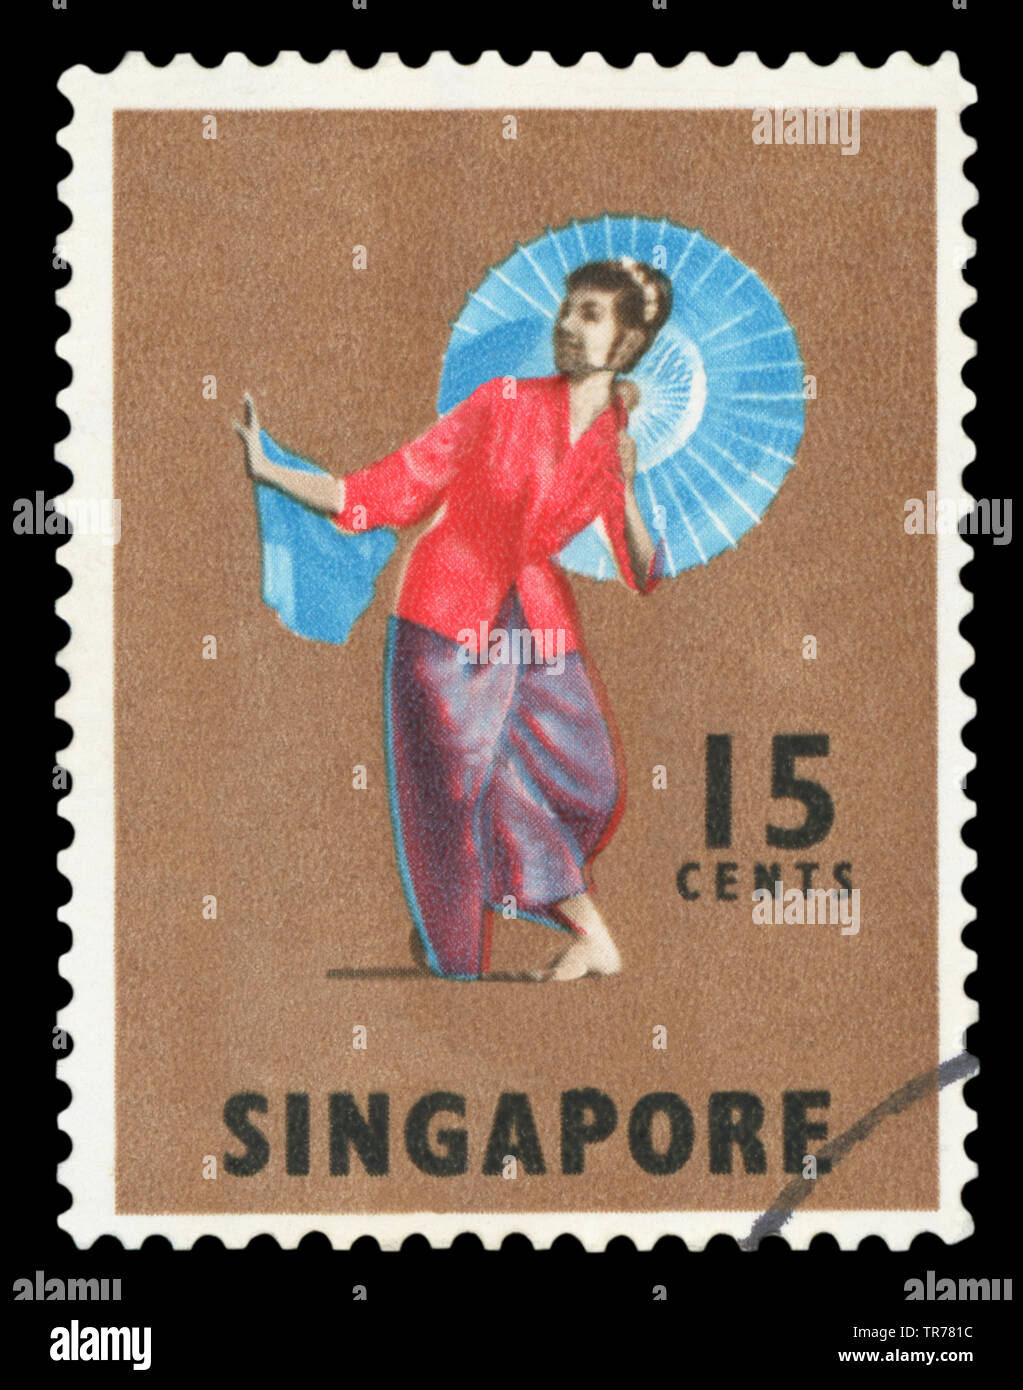 SINGAPORE 1976 PERIOD BRIDAL COSTUMES COMP. SET OF 3 STAMPS SC#257-259 IN  MINT